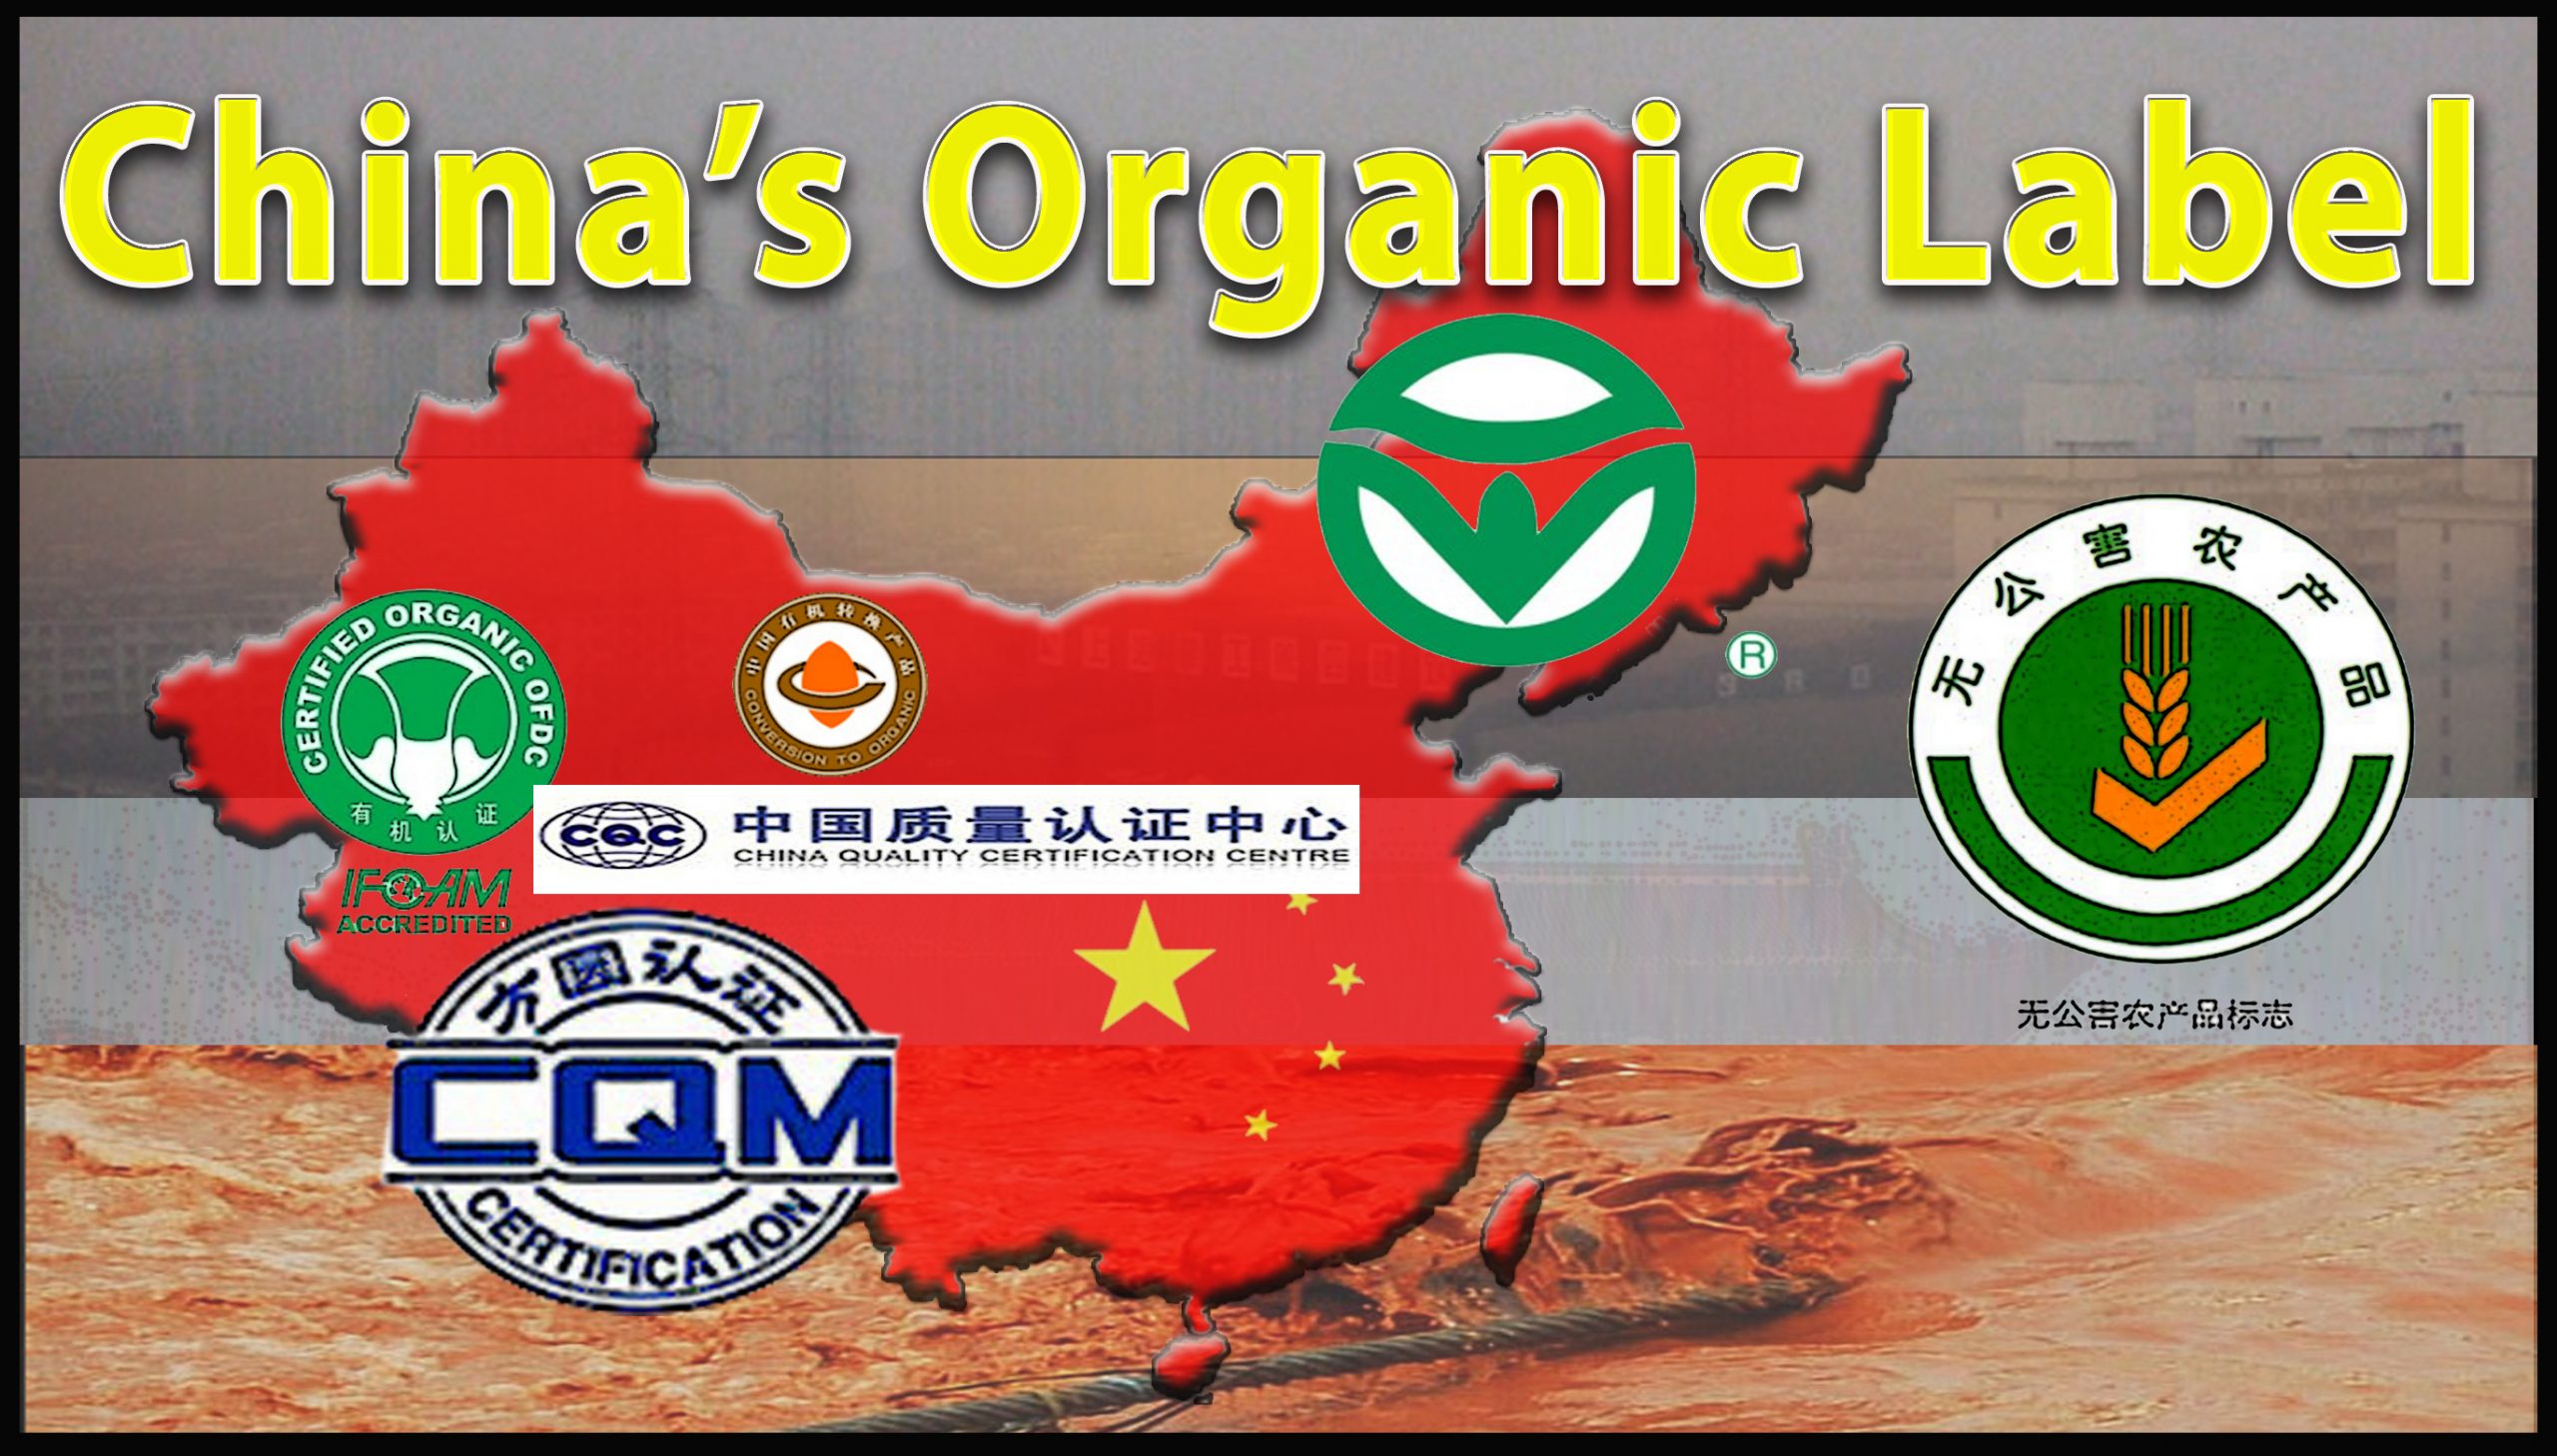 How much of the organic food we eat in the U.S. is contaminated with China’s toxic heavy metals?